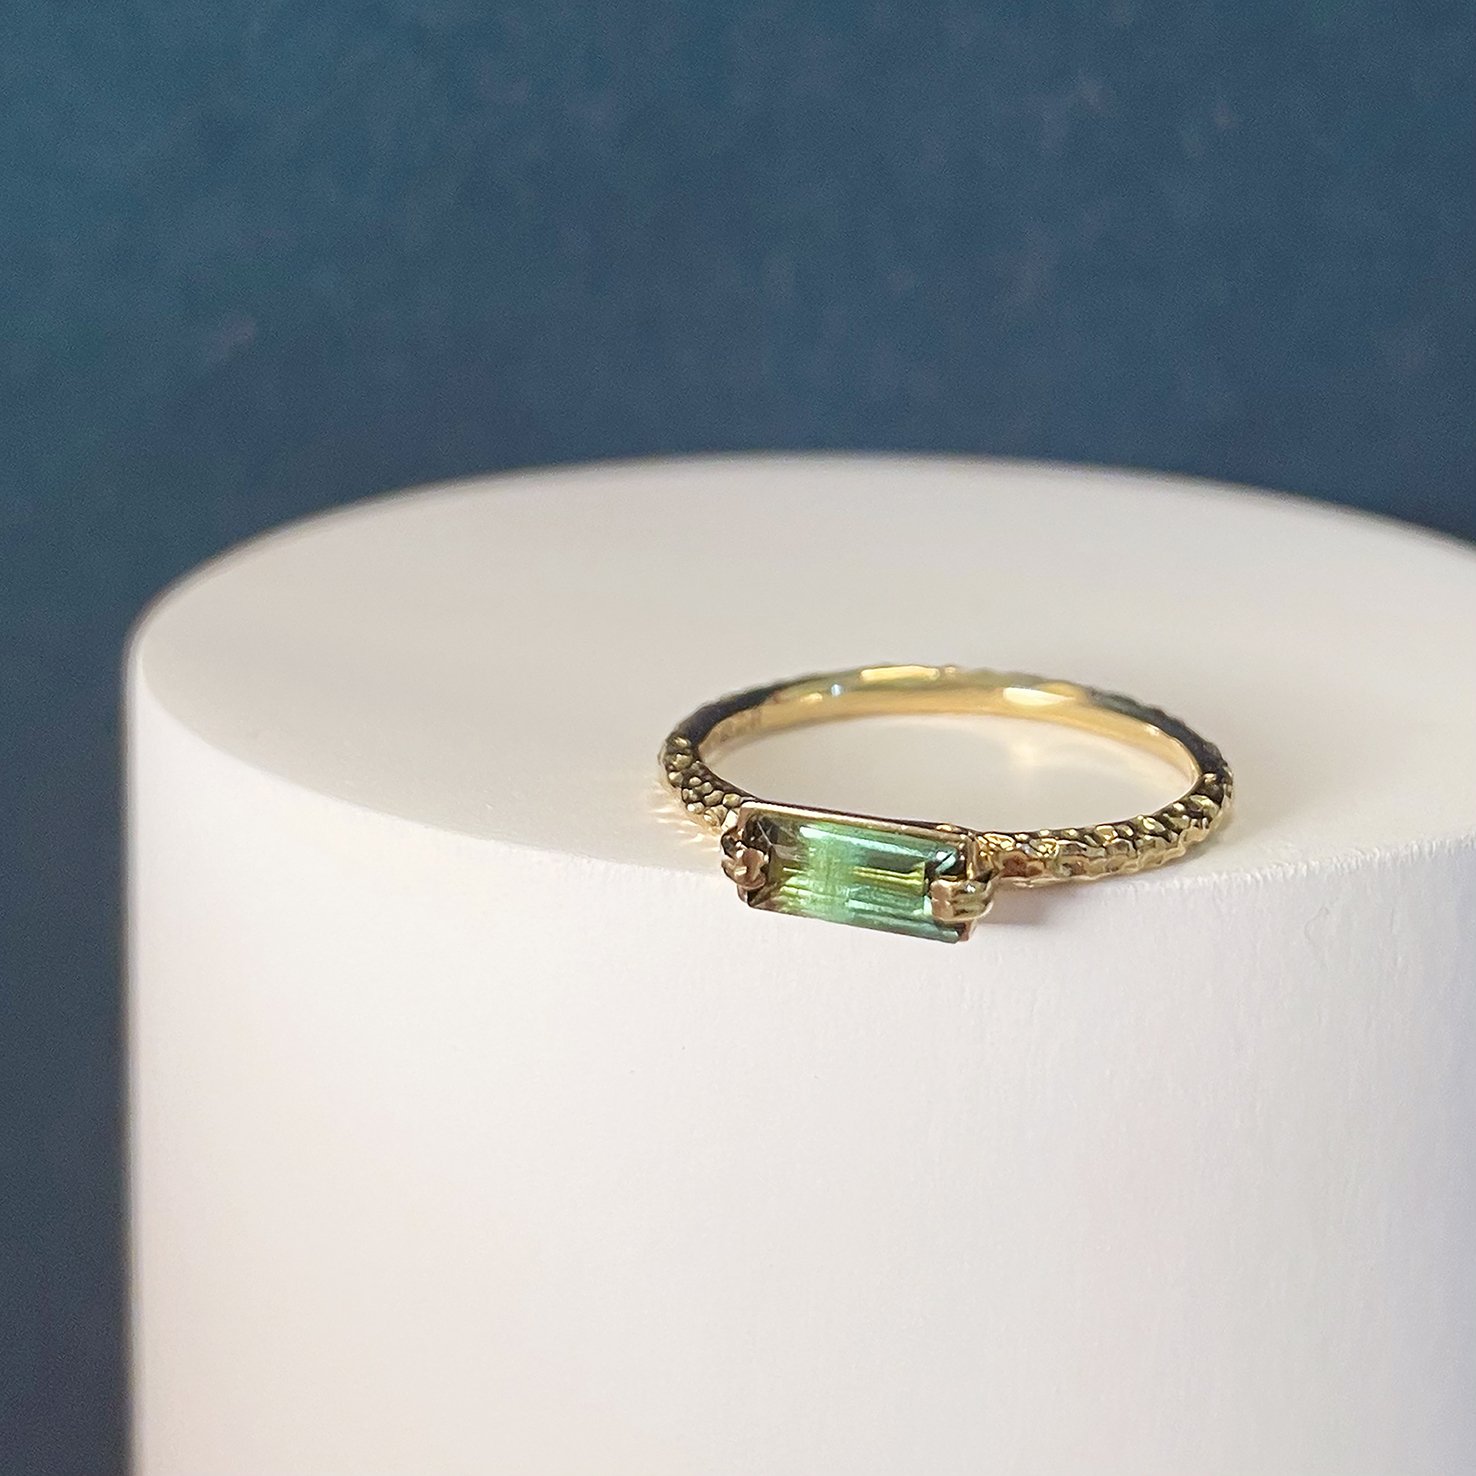  A narrow gold, textured wedding band with a green rectangle stone set on top. 